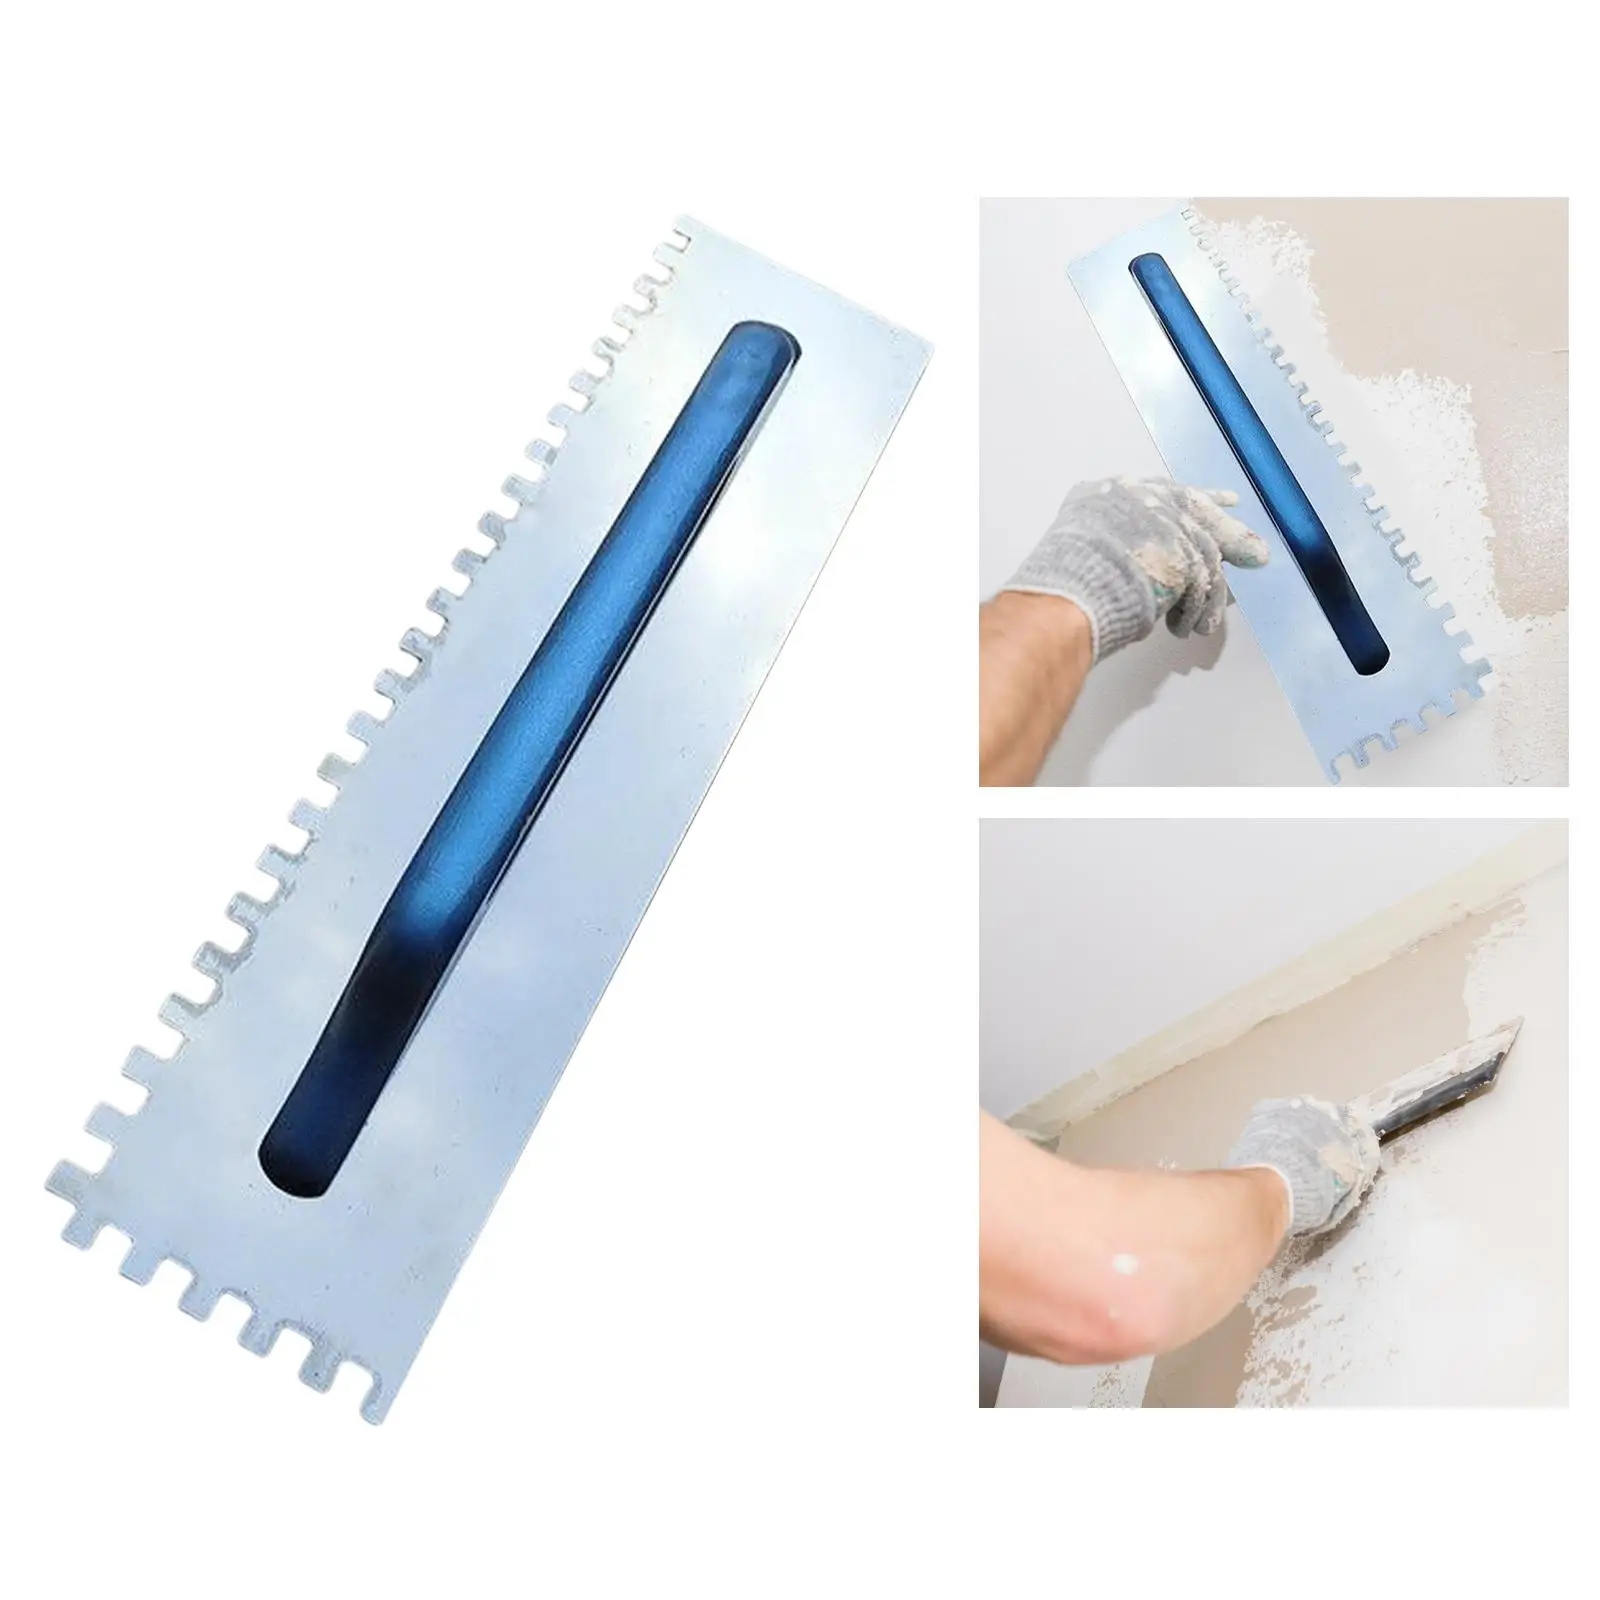 Stainless Steel Drywall Smoothing Spatula Construction Tool Concrete Scraping Tool Plaster Trowel Painting Portable Skimming